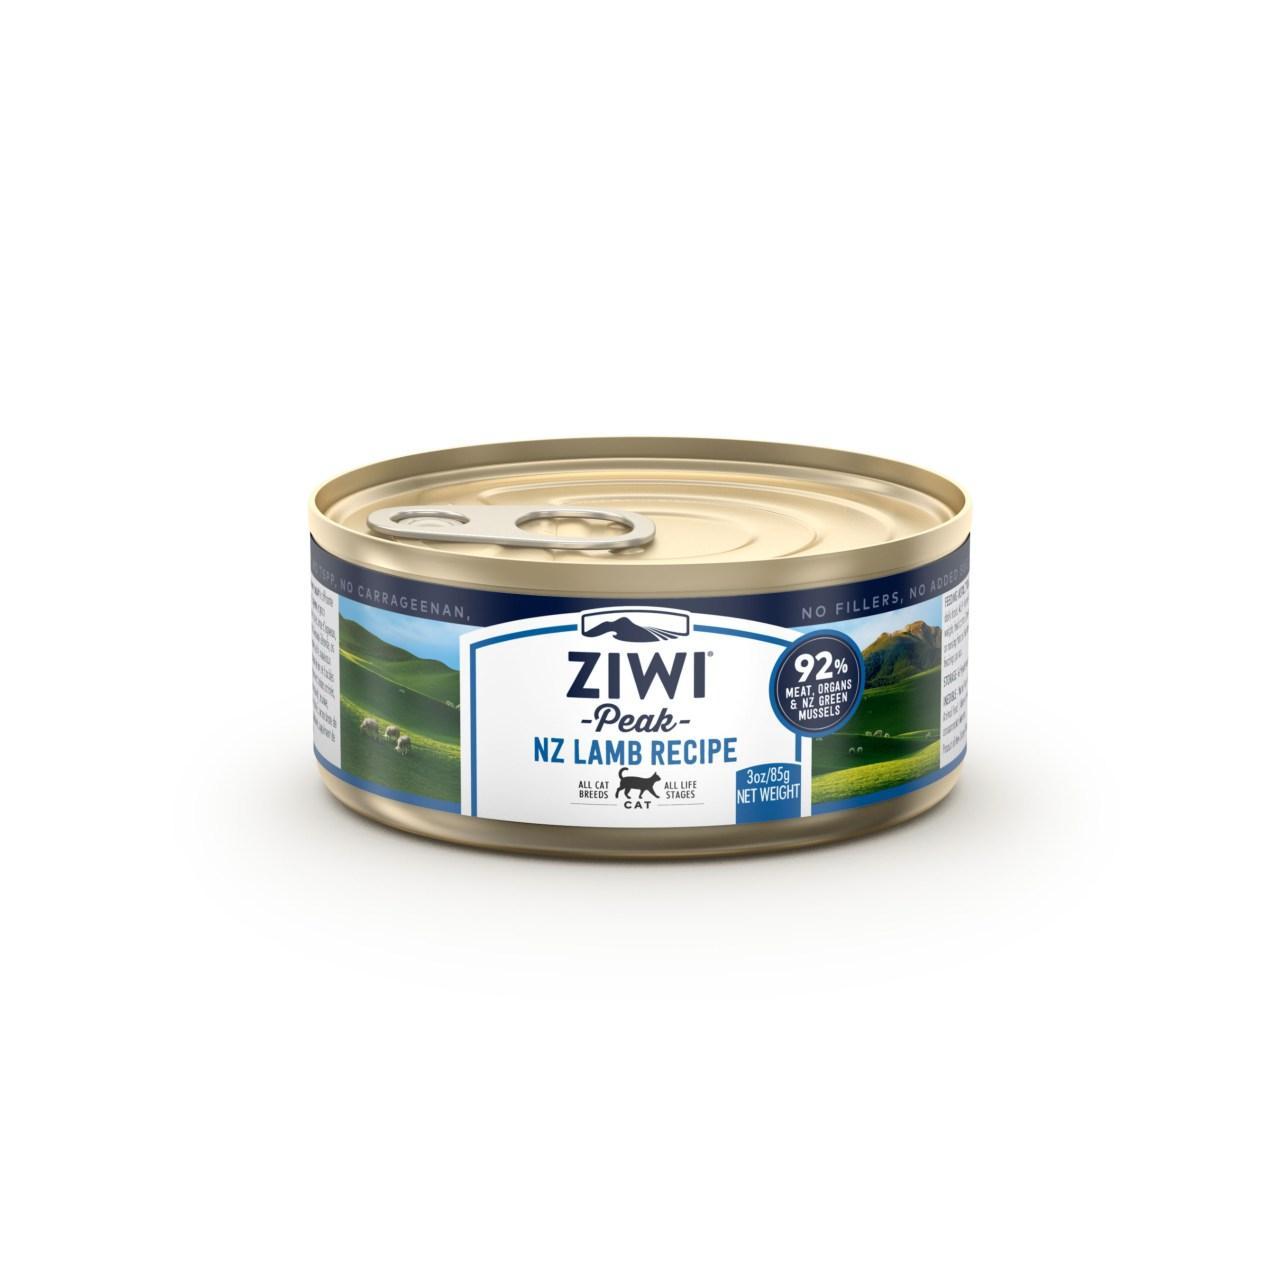 An image of ZiwiPeak Daily Cat Cuisine Cans Lamb